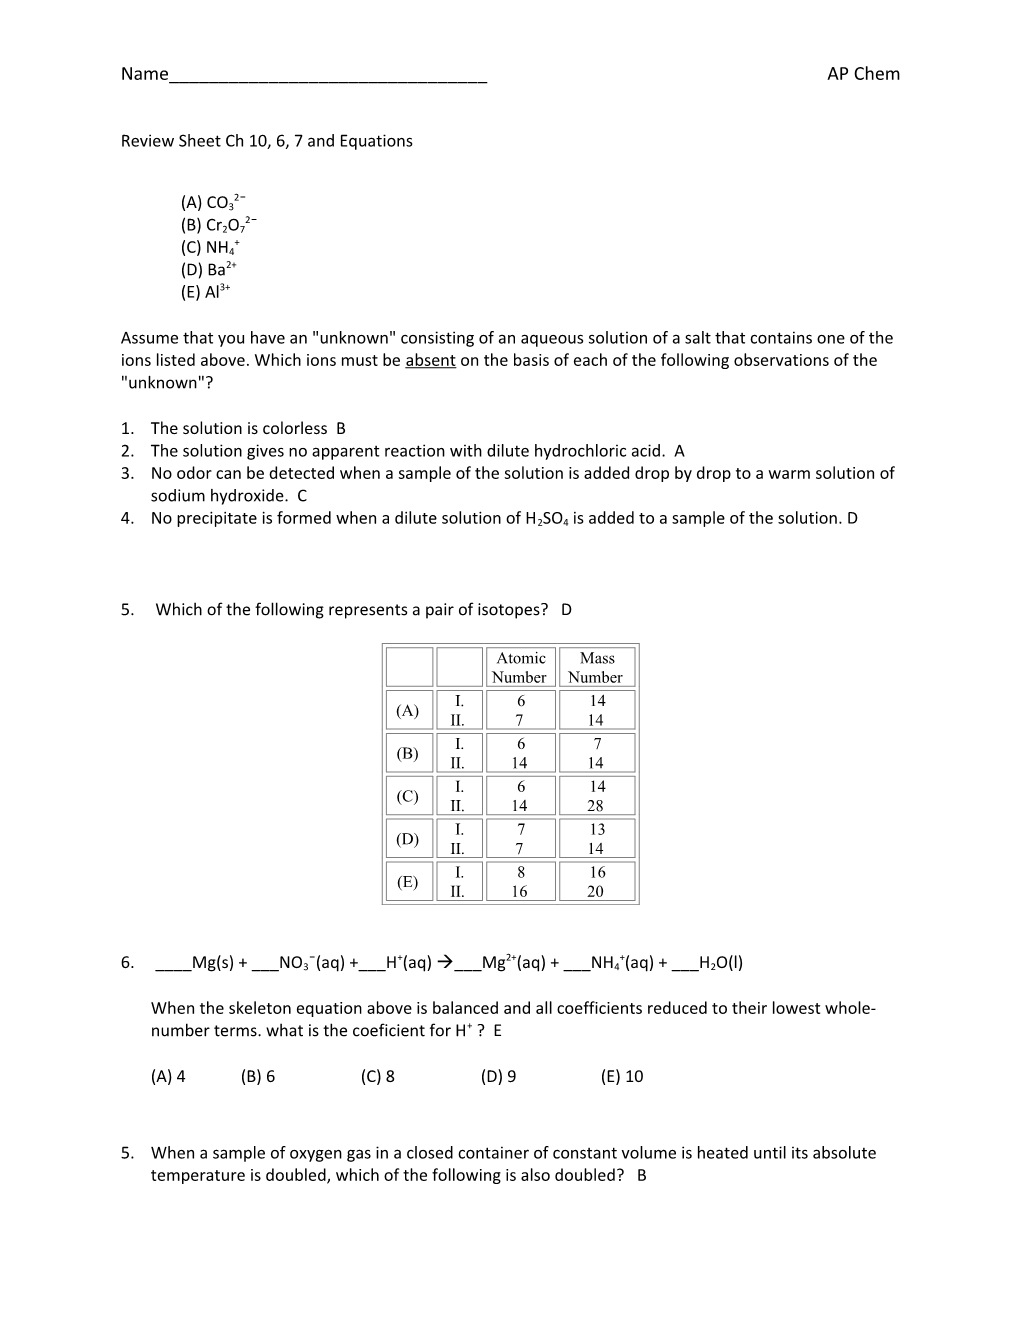 Review Sheet Ch 10, 6, 7 and Equations